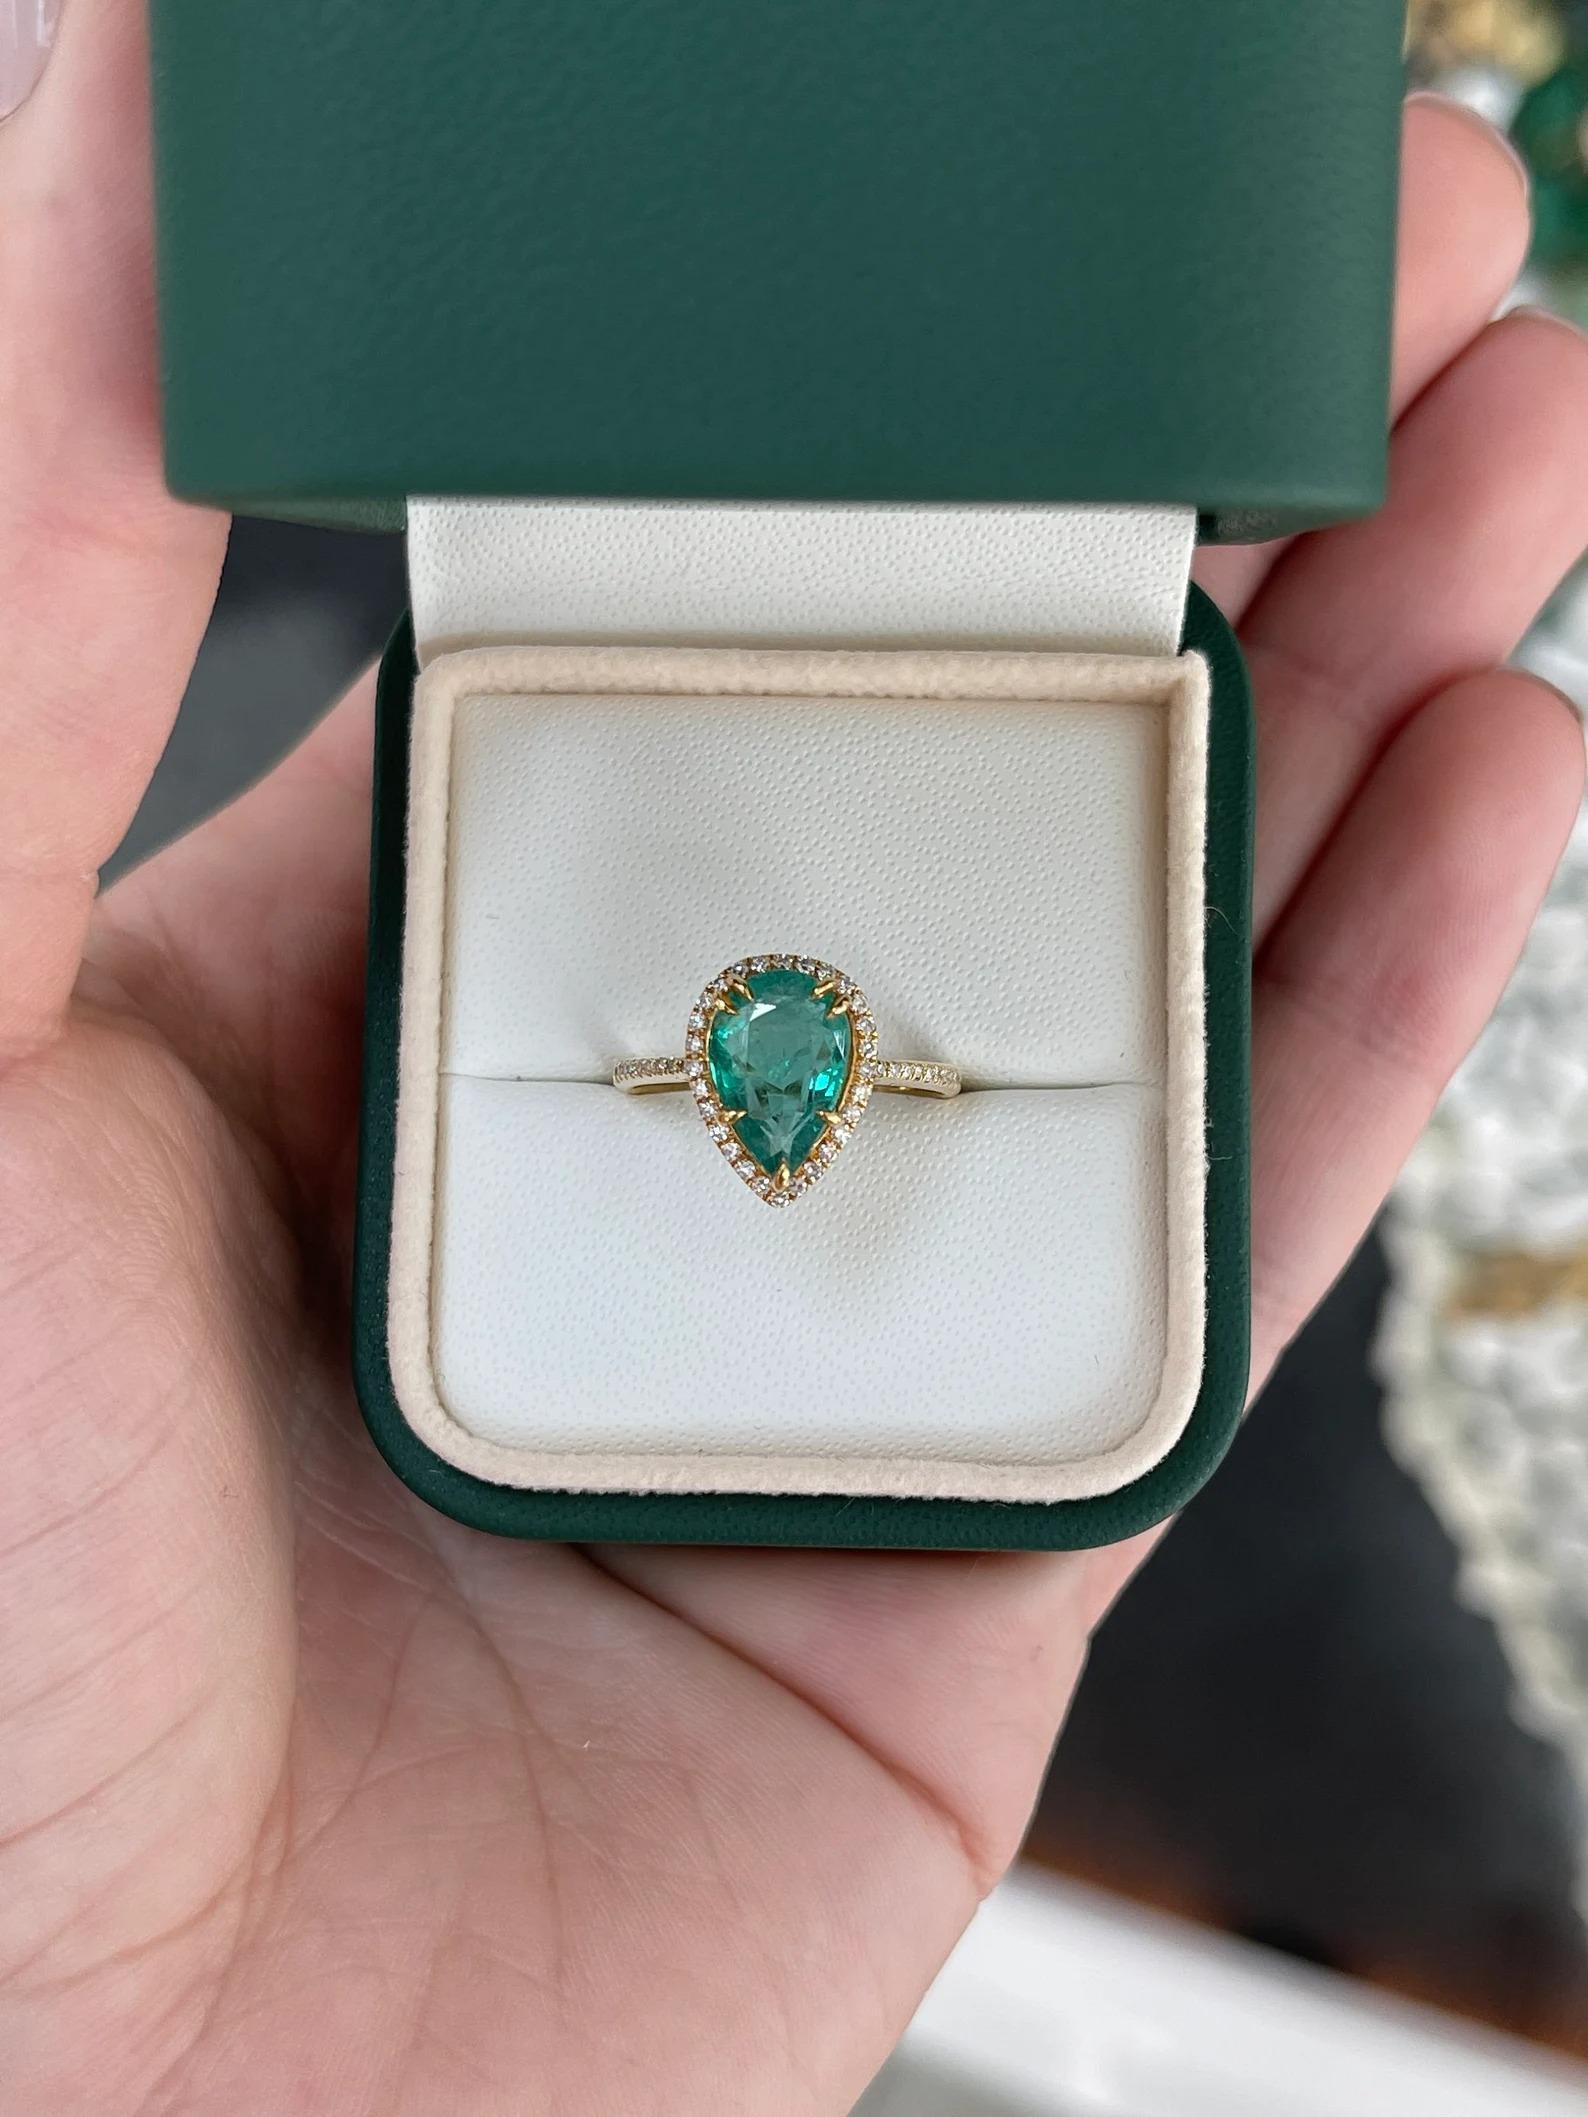 A ravishing emerald and diamond halo right-hand/engagement ring. This striking piece features a stunning pear-cut emerald from the natural origin of Zambia. The gemstone displays an alluring bluish-green hue with its natural medium green color. Very